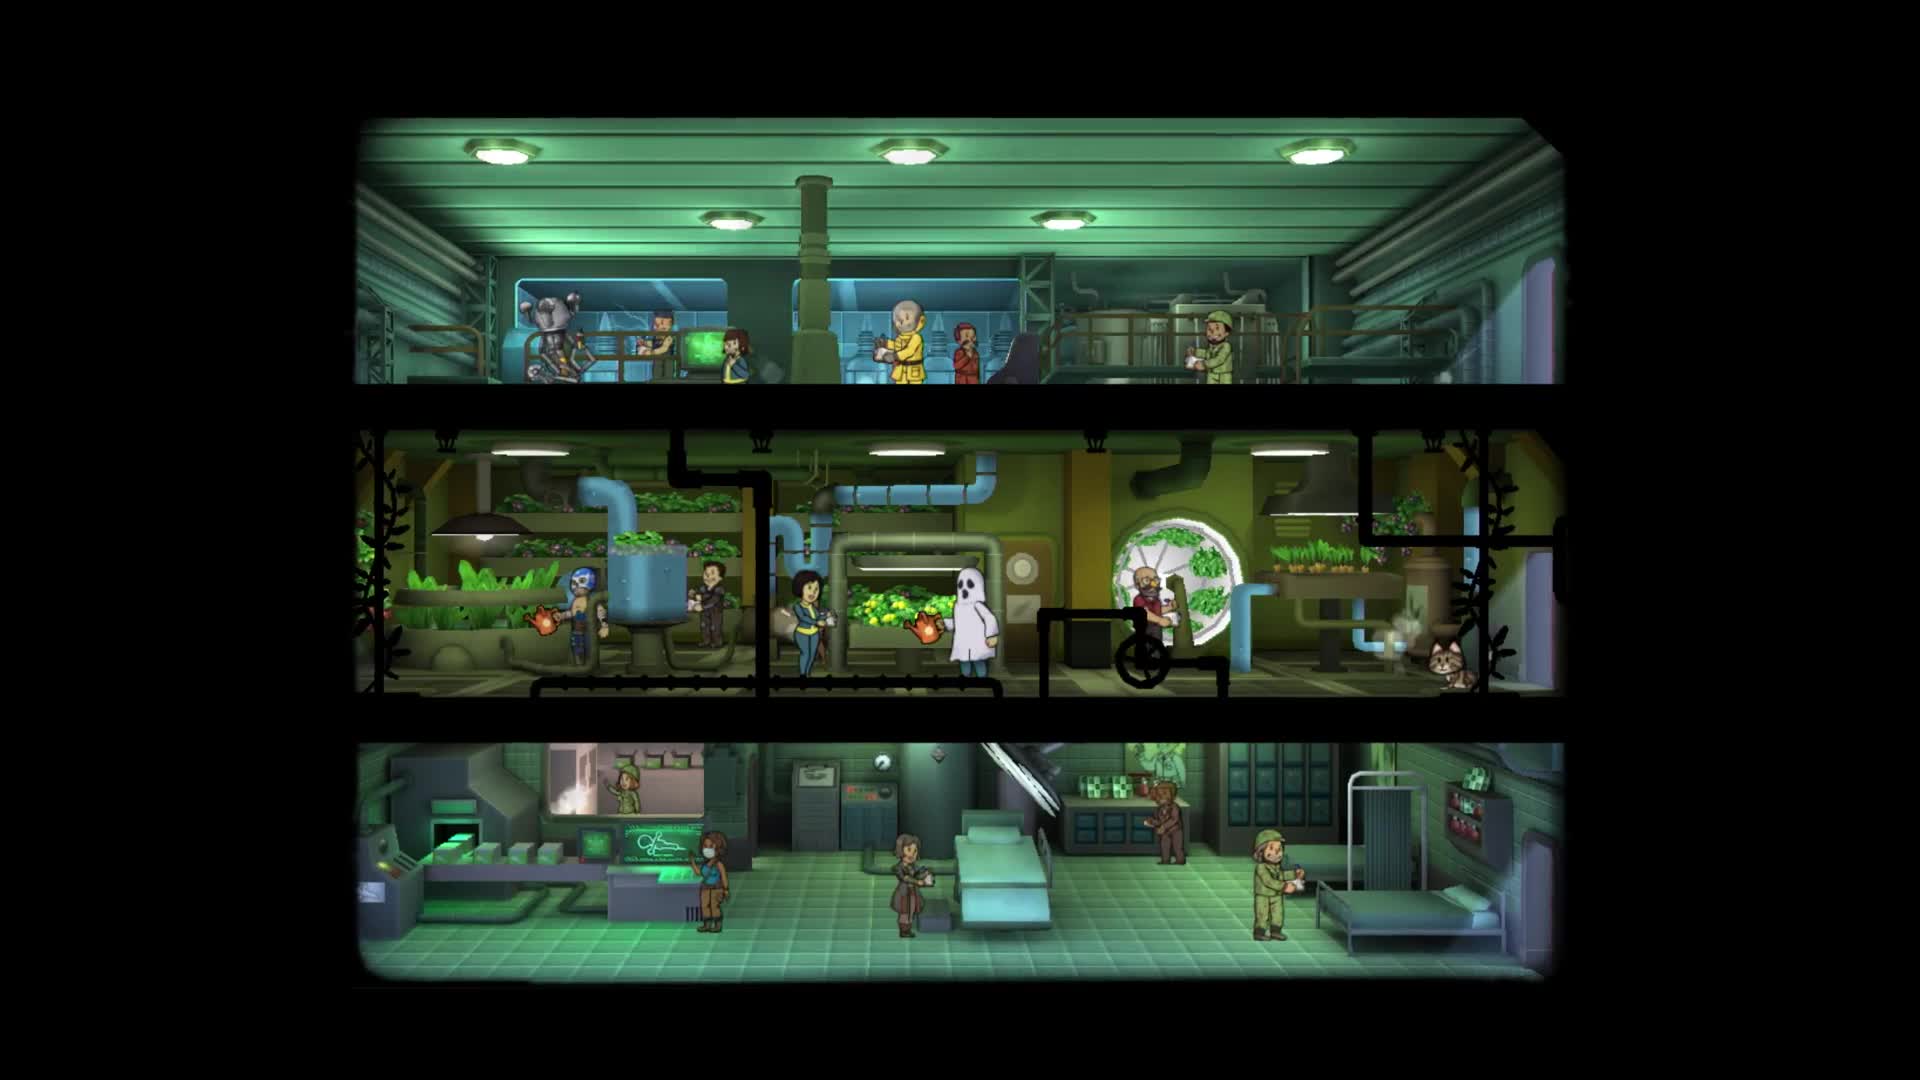 Fallout Shelter - Xbox One - Windows 10 trailer